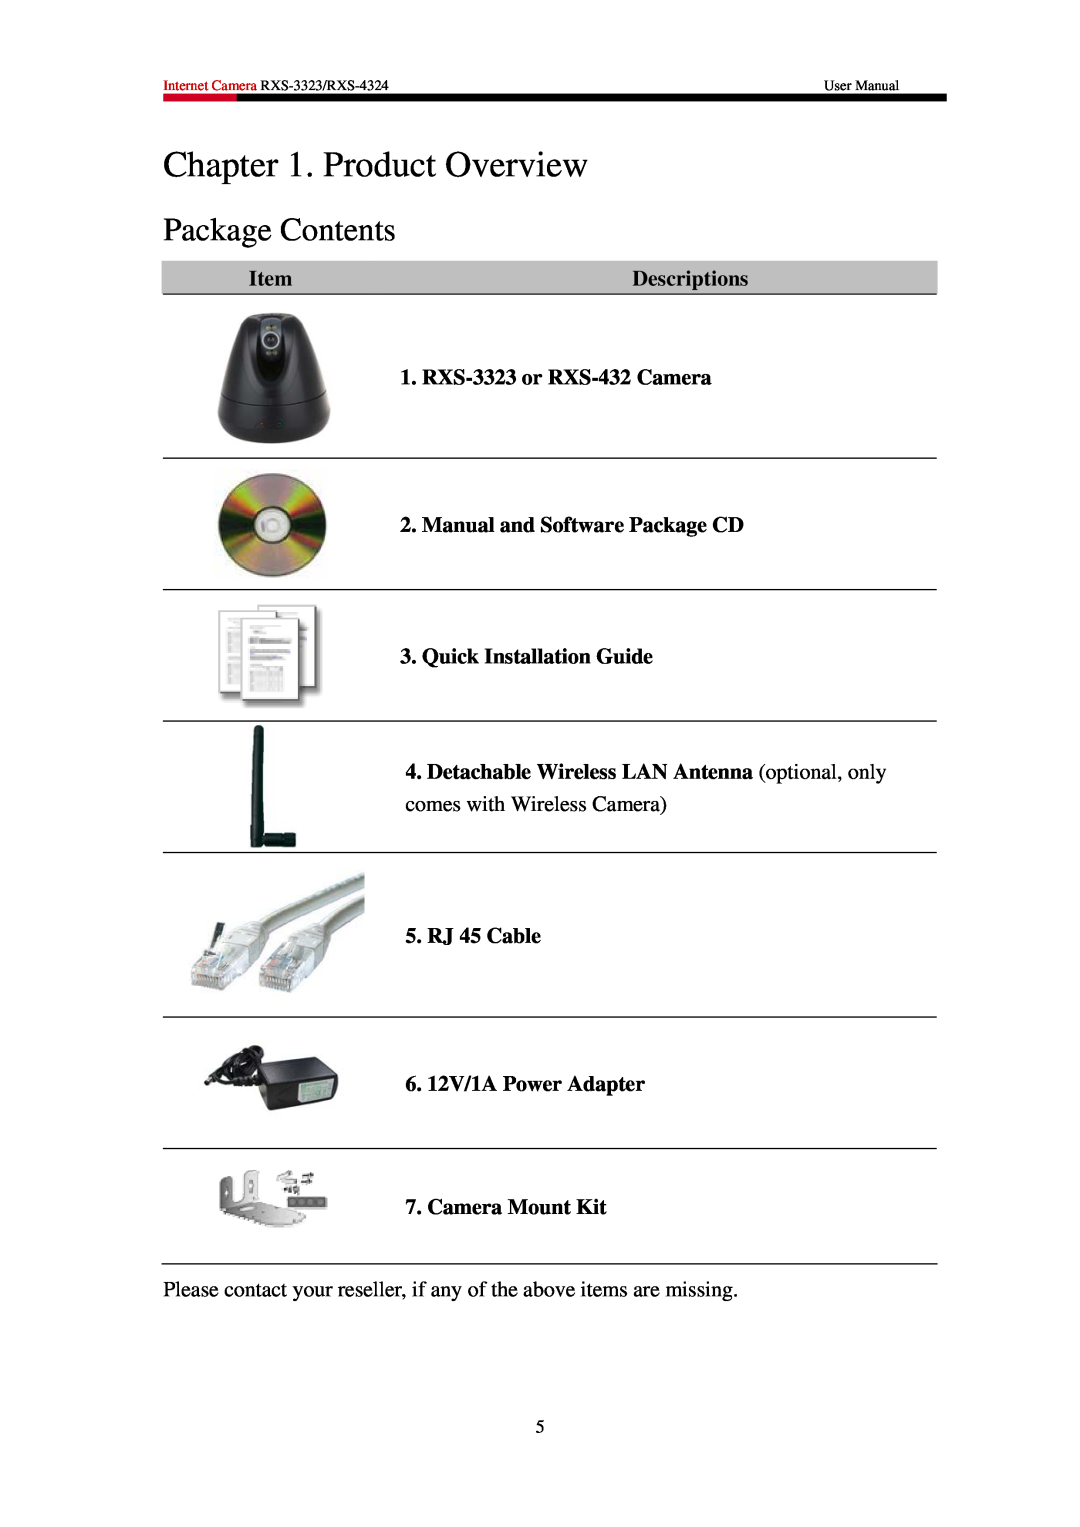 Rosewill RXS-4324, RXS-3323 user manual Package Contents, Product Overview, Descriptions, Quick Installation Guide 